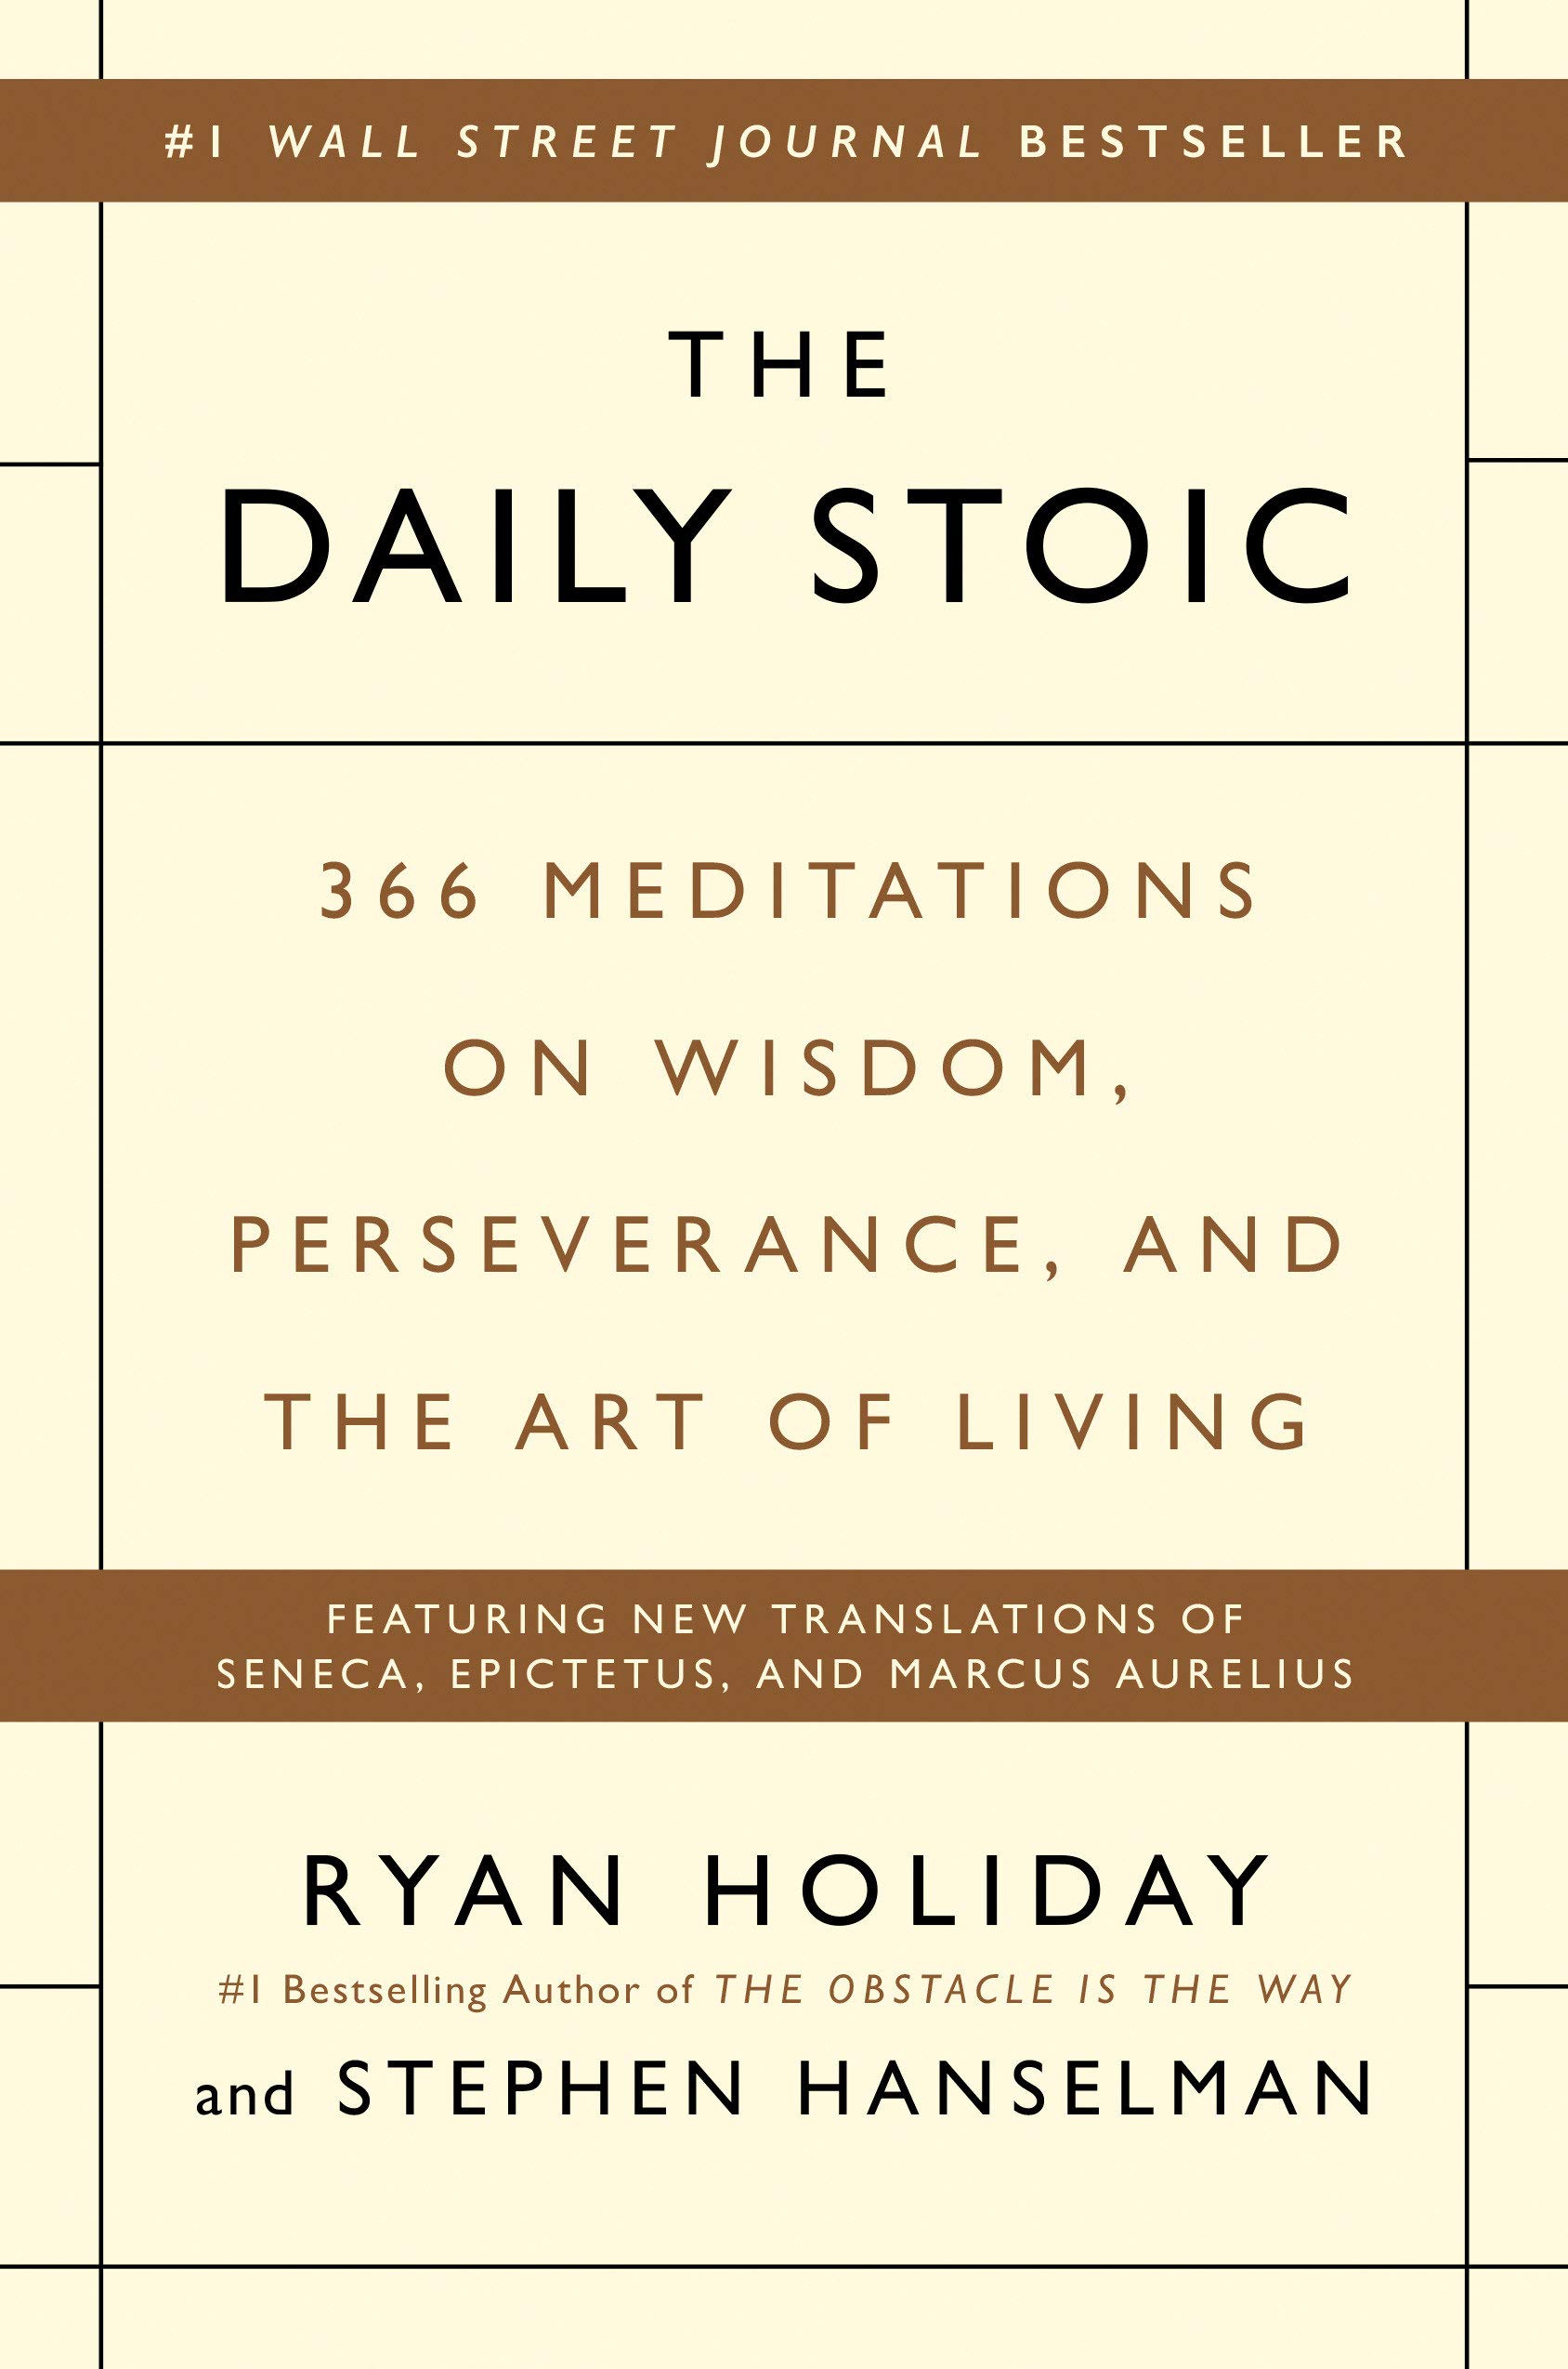 <em>The Daily Stoic: 366 Meditations on Wisdom, Perseverance, and the Art of Living</em> by Ryan Holiday and Stephen Hanselman